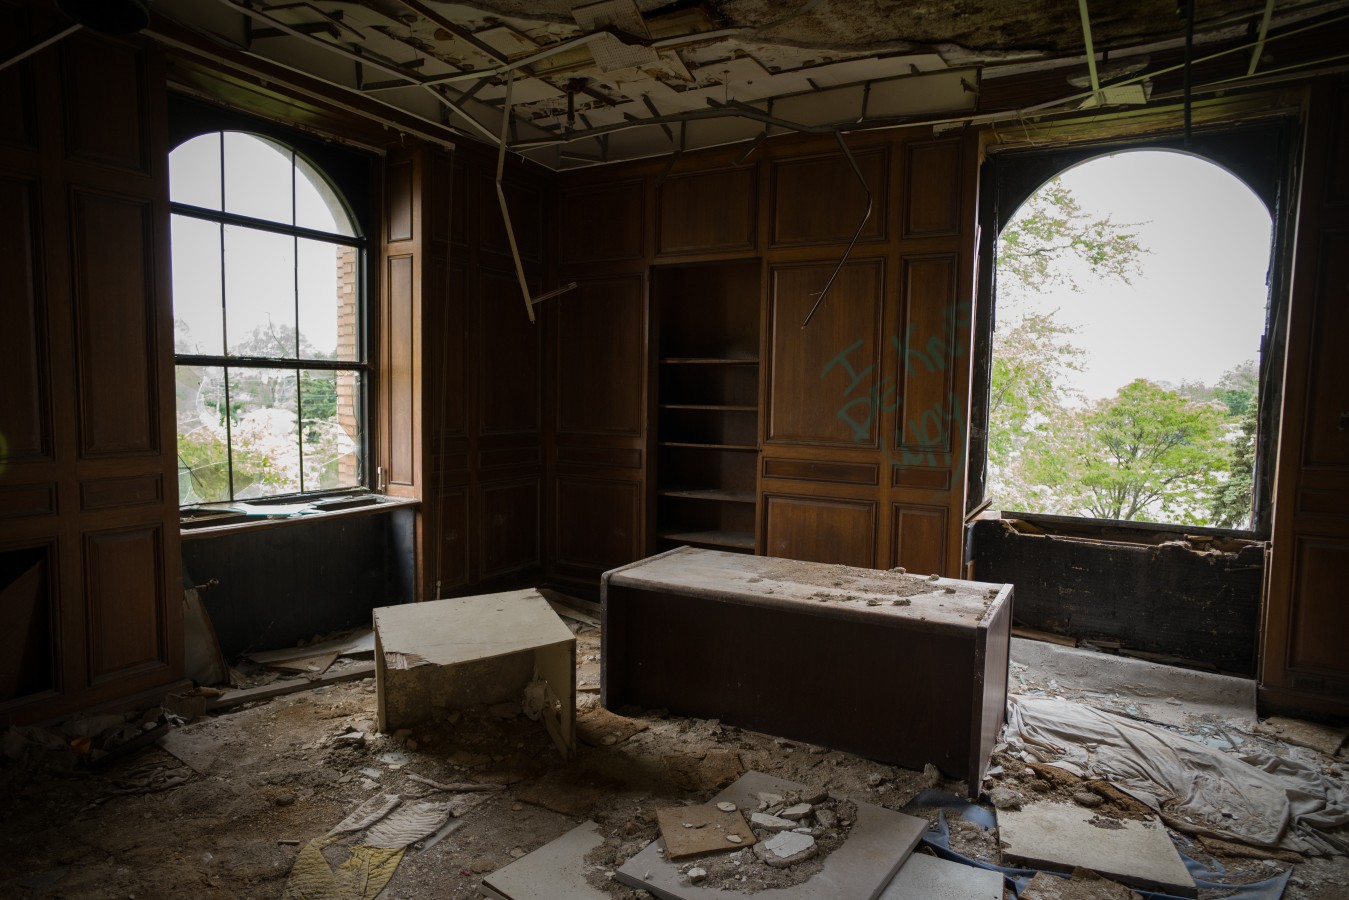 Detroit 2019_downfall_ (27 of 31)